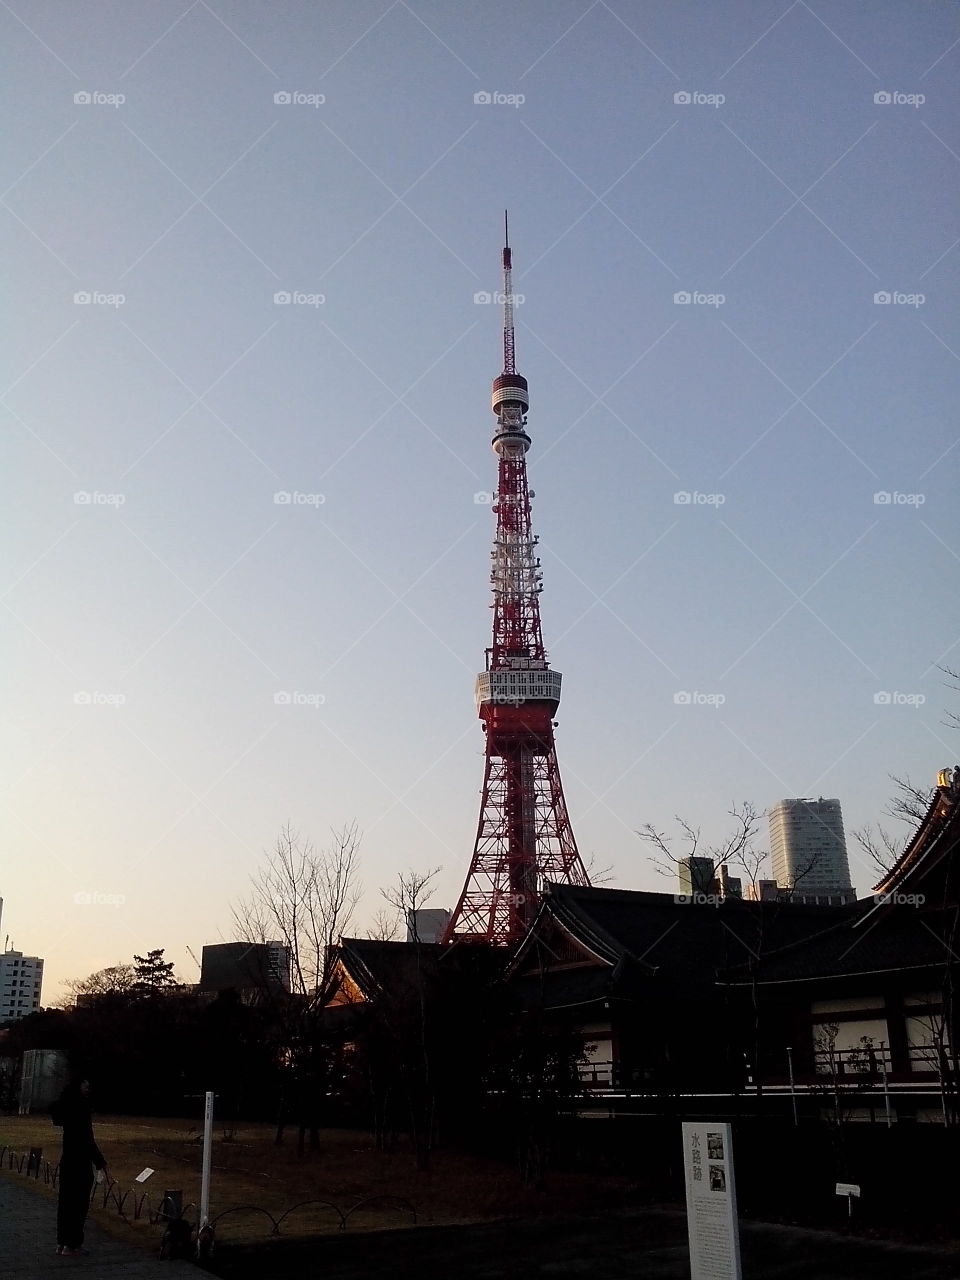 Tokyo Tower. Taken in Tokyo, Japan on New Year's Eve 2014.